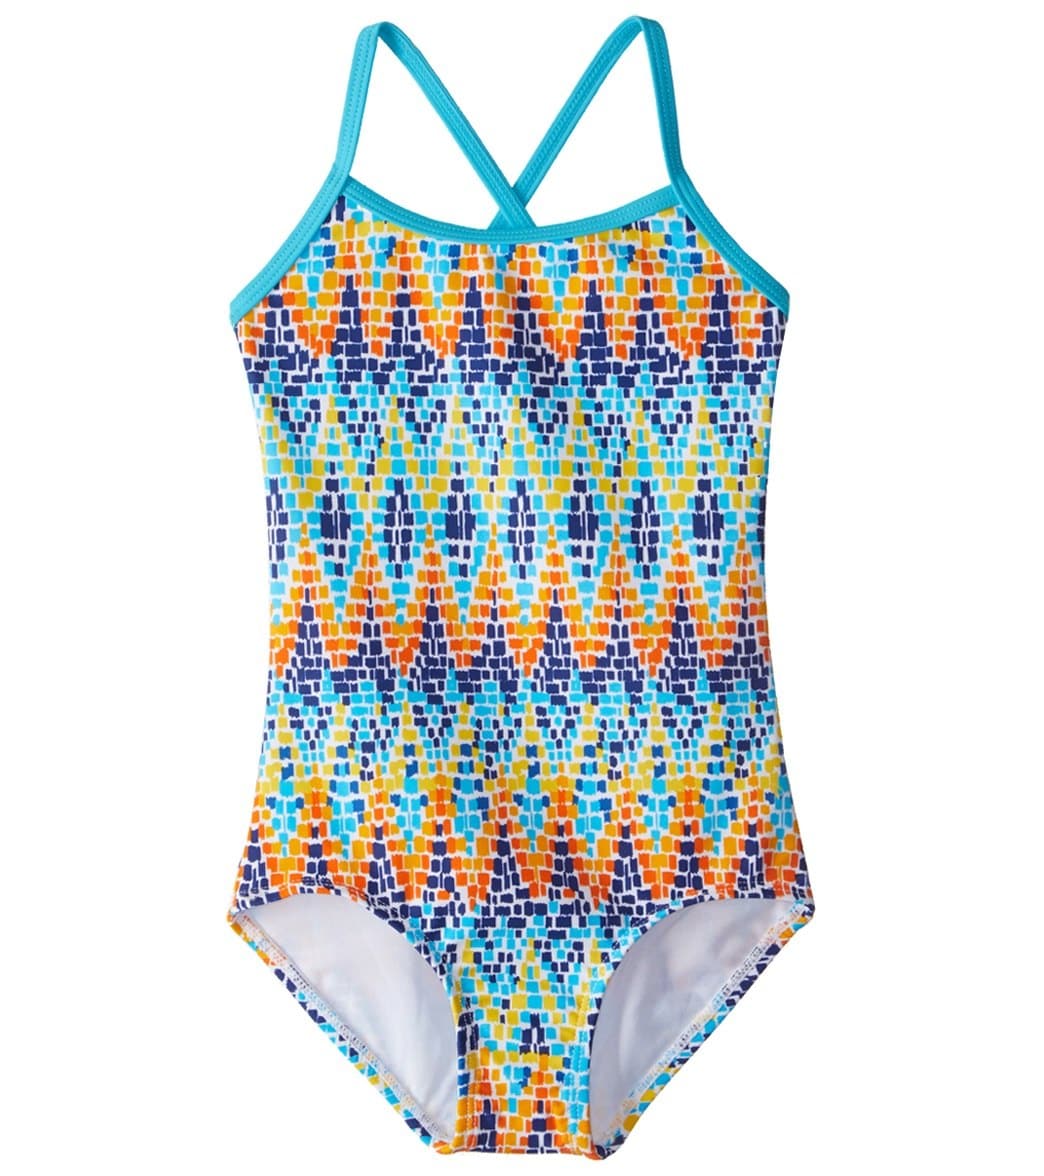 Kanu Surf Girls' Candy One Piece Swimsuit - Blue 2T Nylon/Spandex - Swimoutlet.com